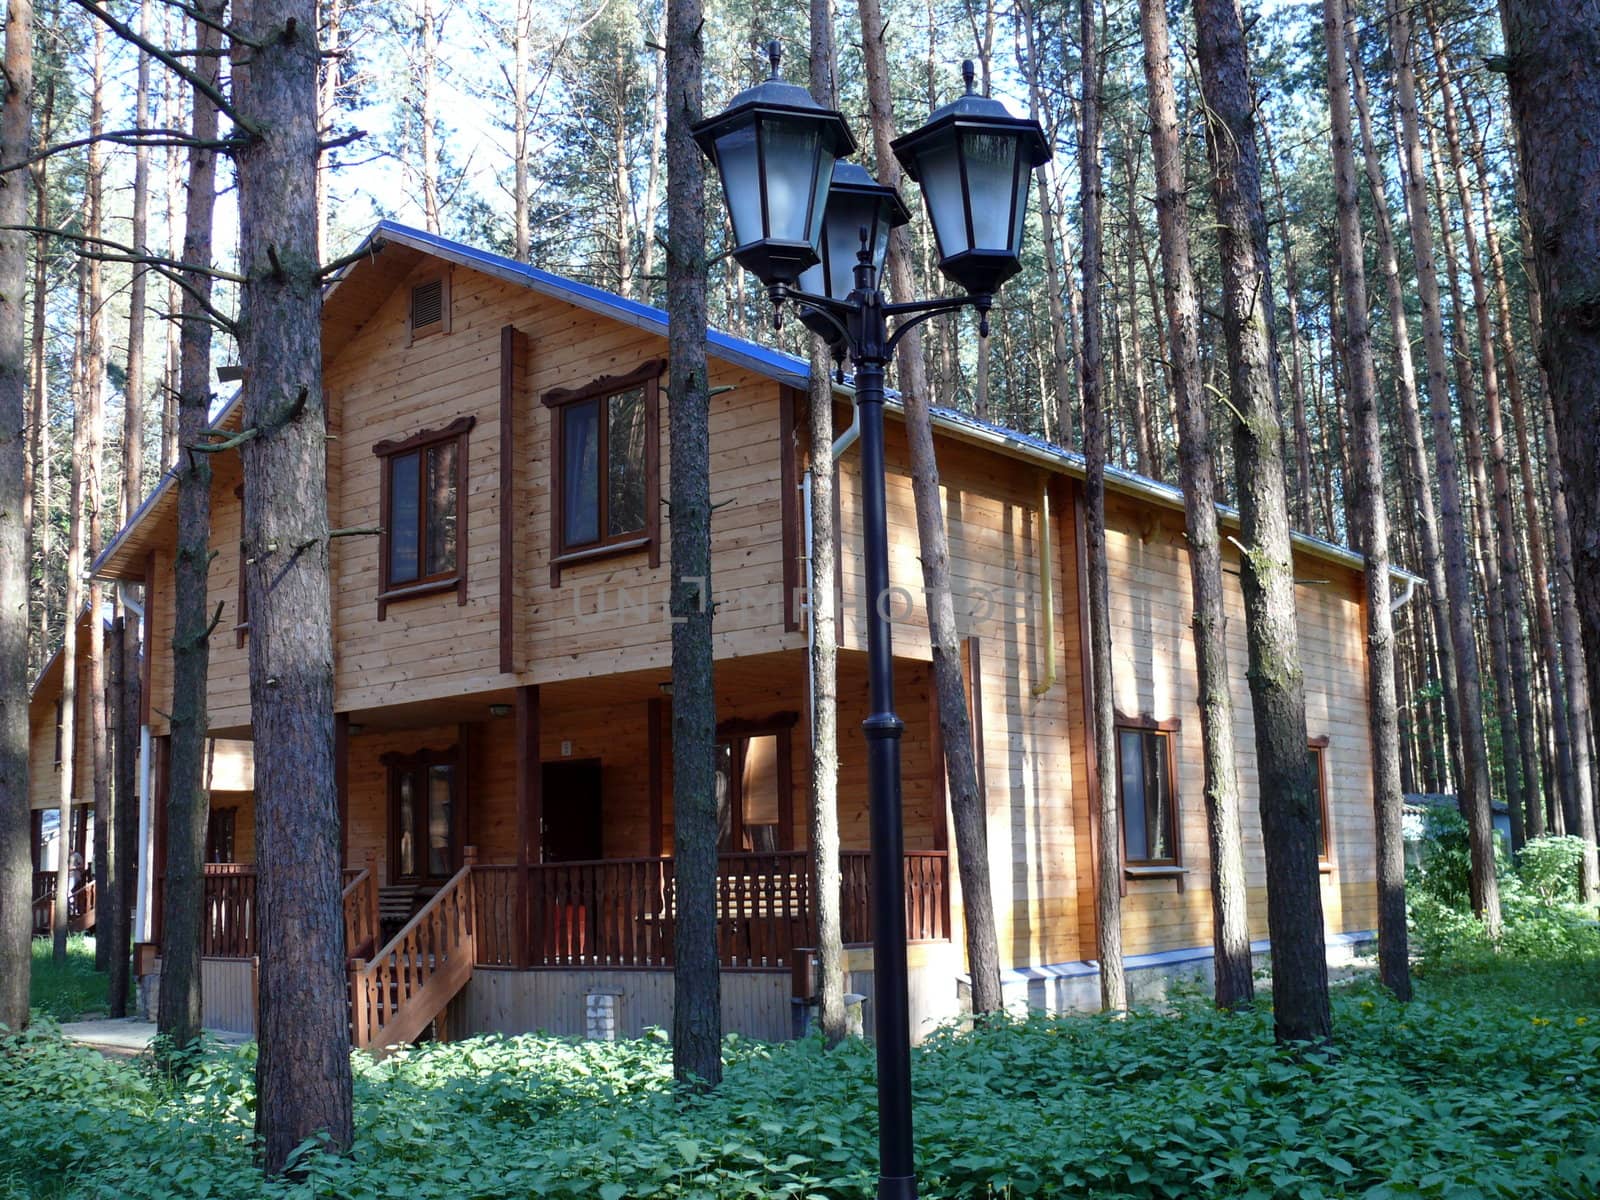 wooden cottages in pine forest